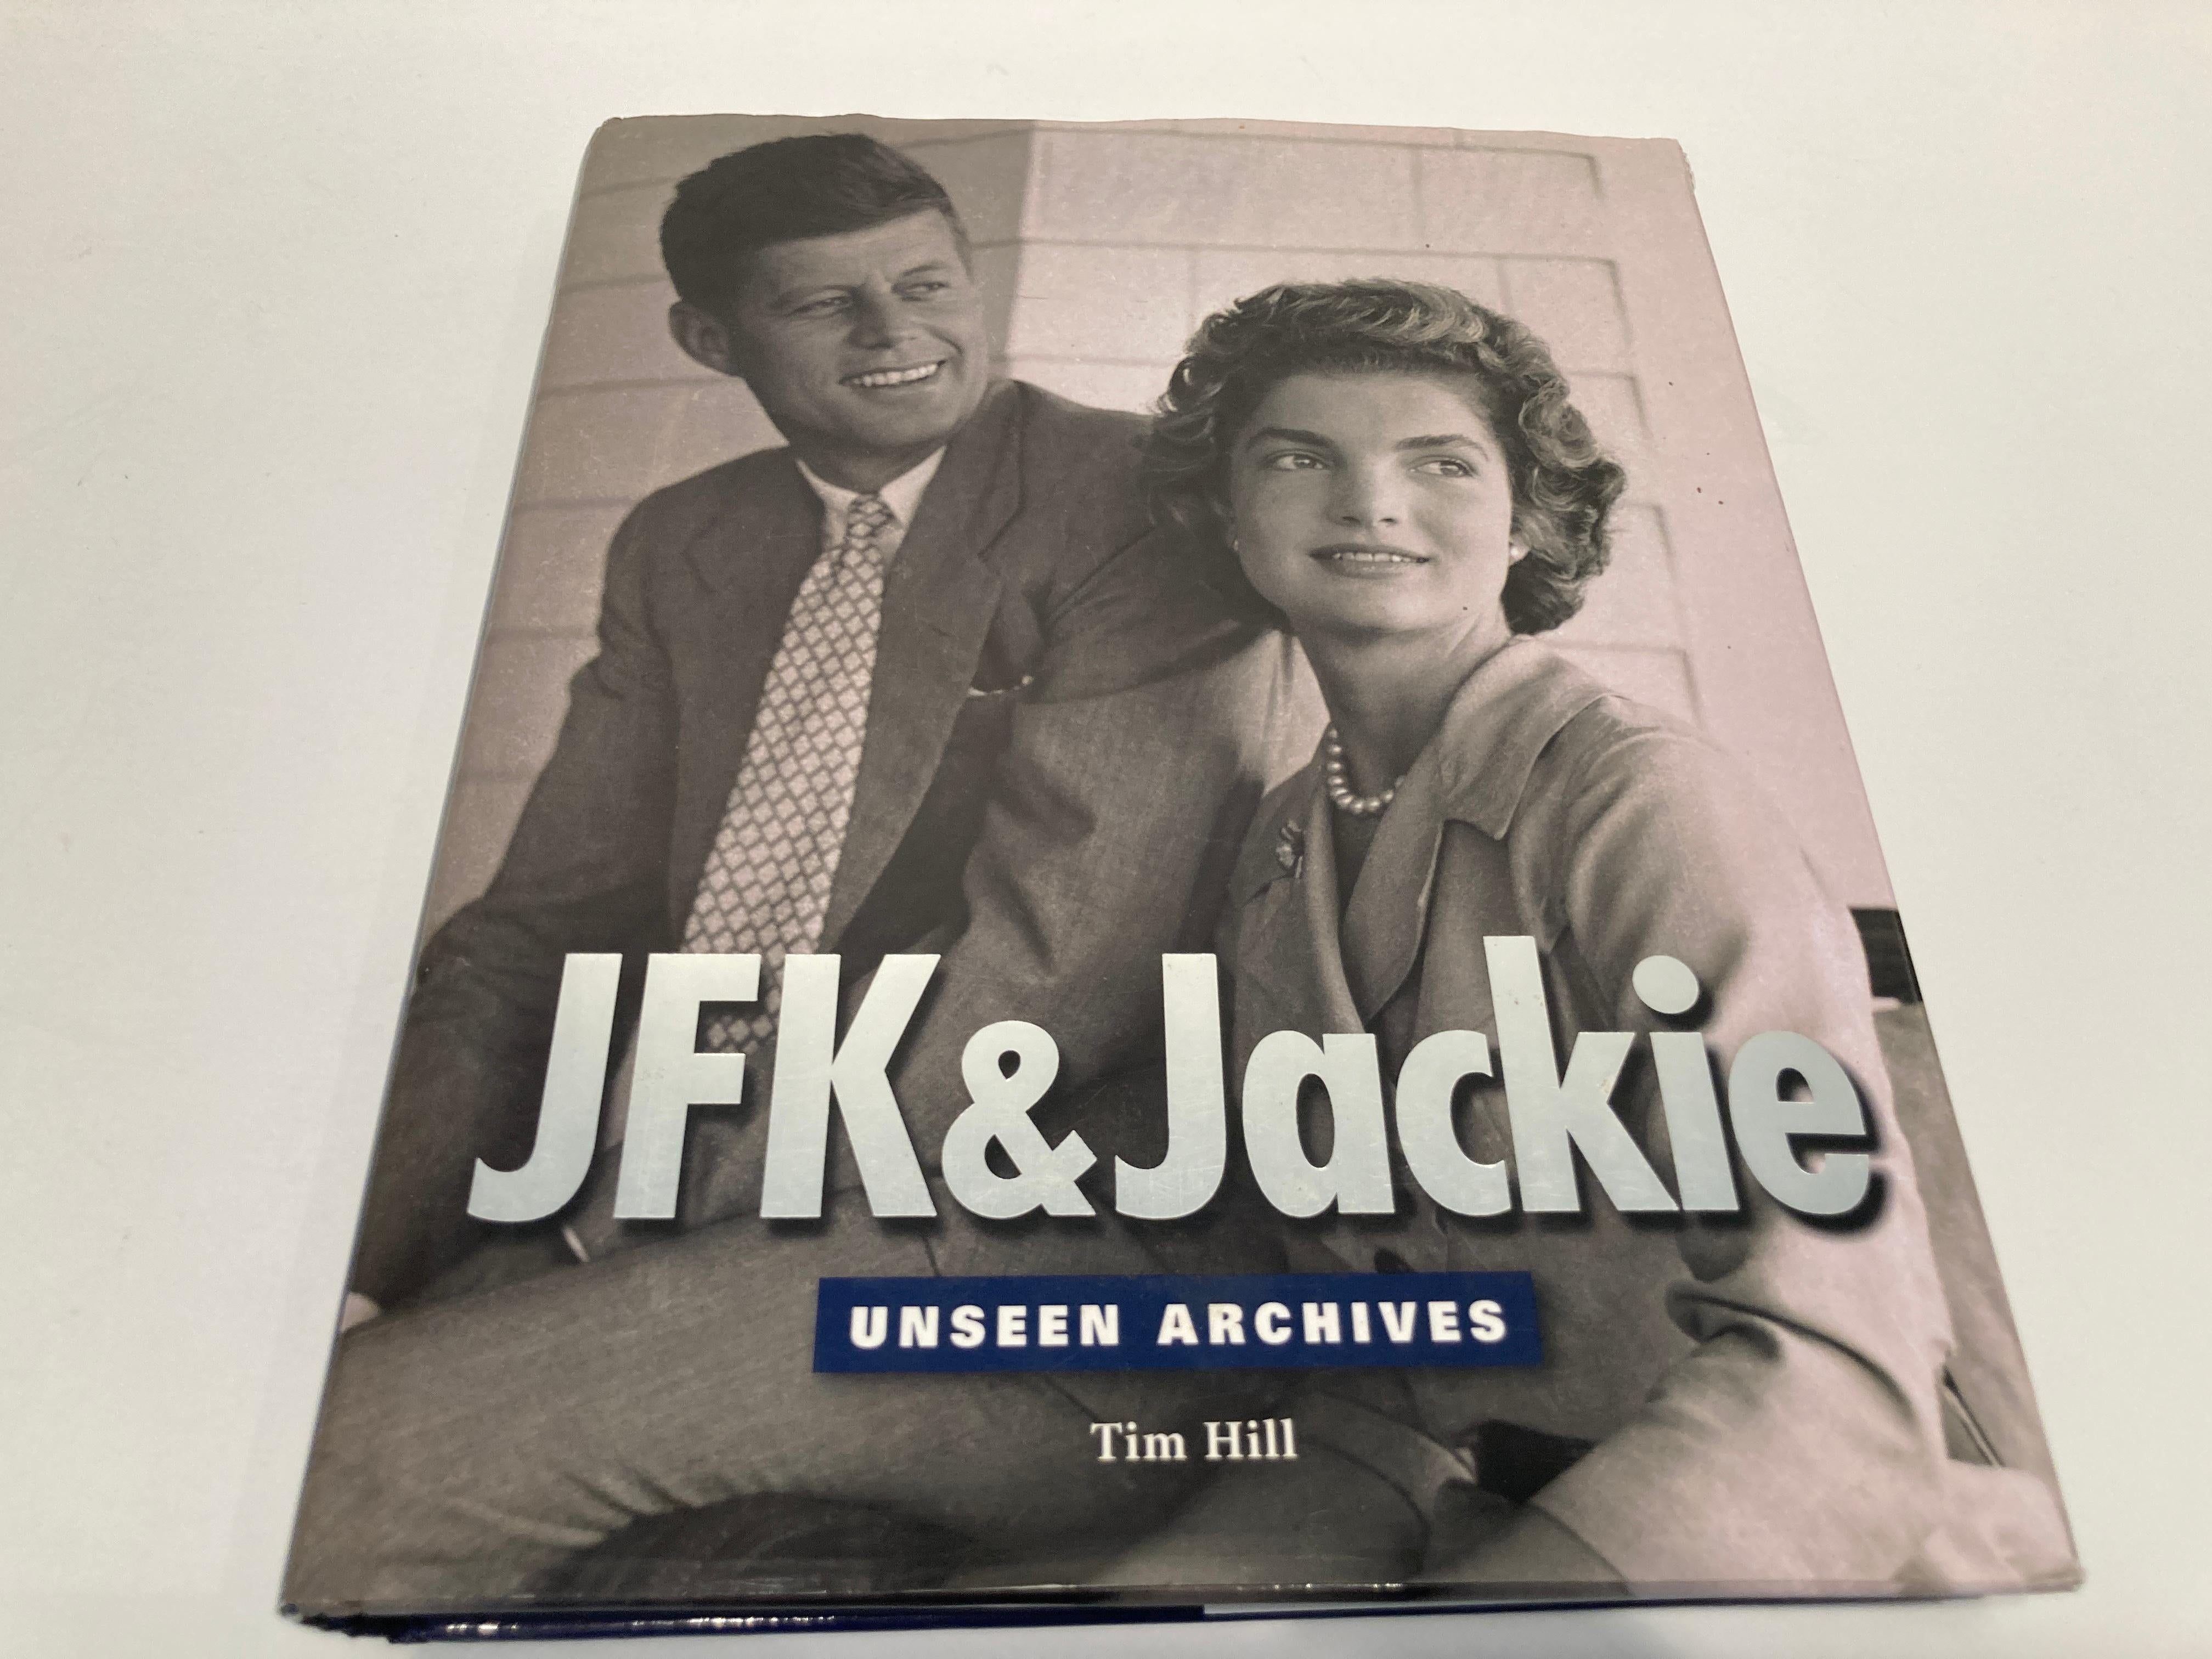 American Classical JFK & Jackie Unseen Archives Hardcover Book For Sale